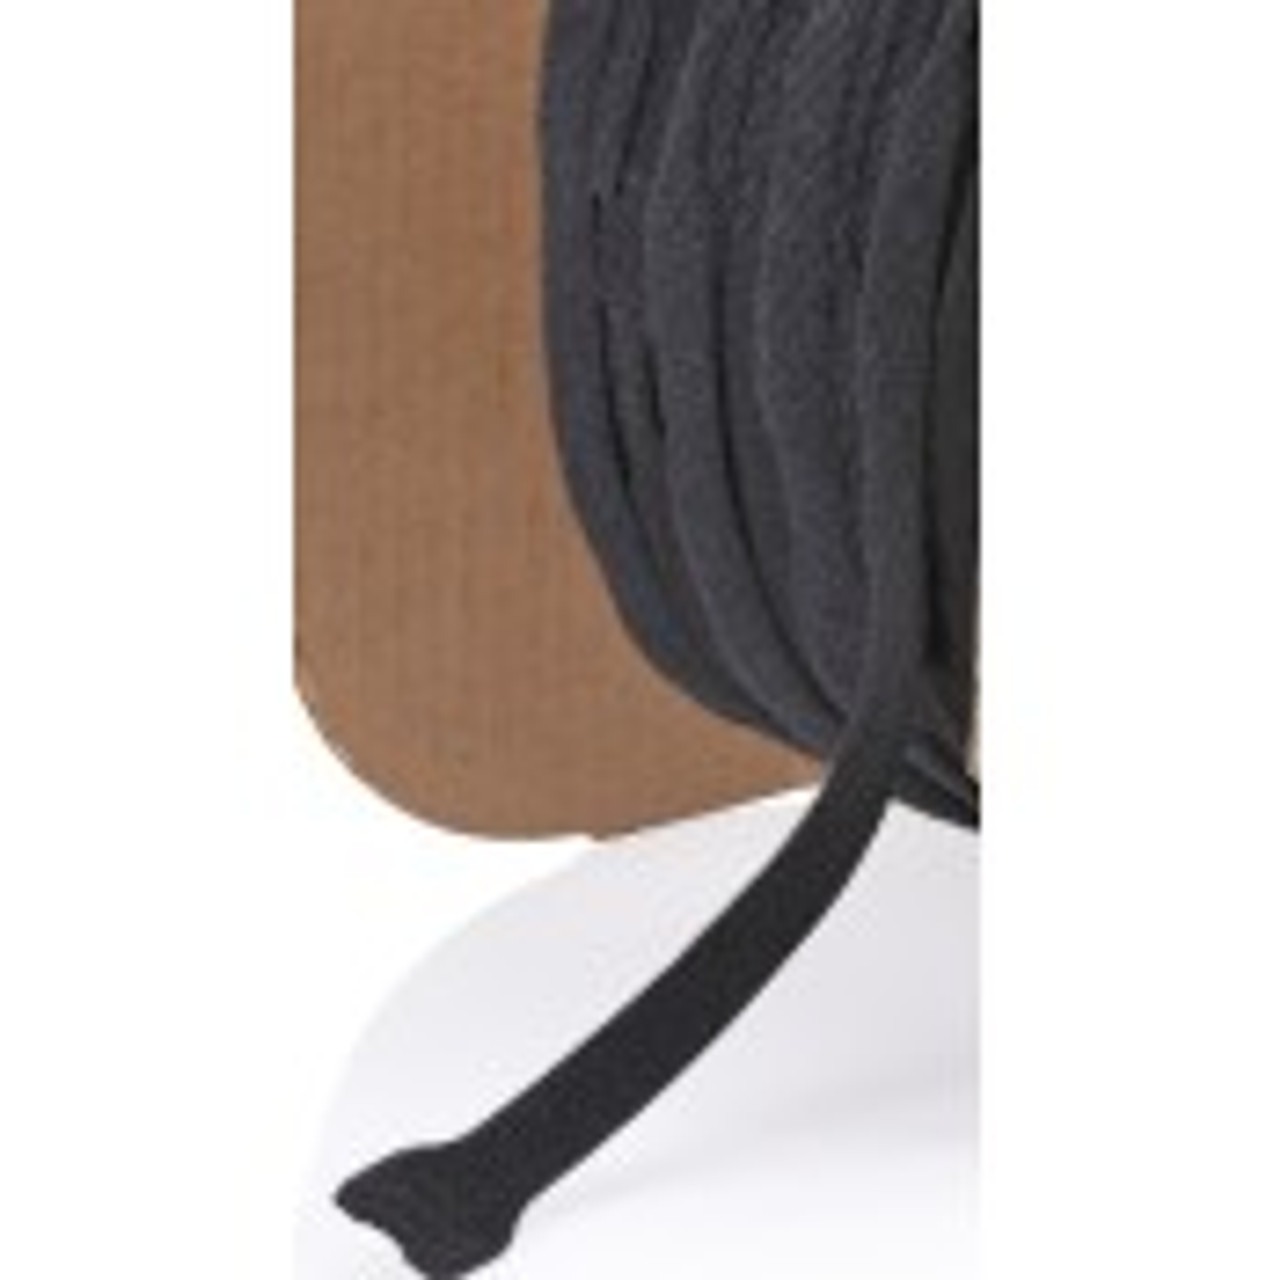 VELCRO Brand - ONE-WRAP: For Cables, Wires & Cords - 8 x 1/4 Ties, 25 Ct.  - Black